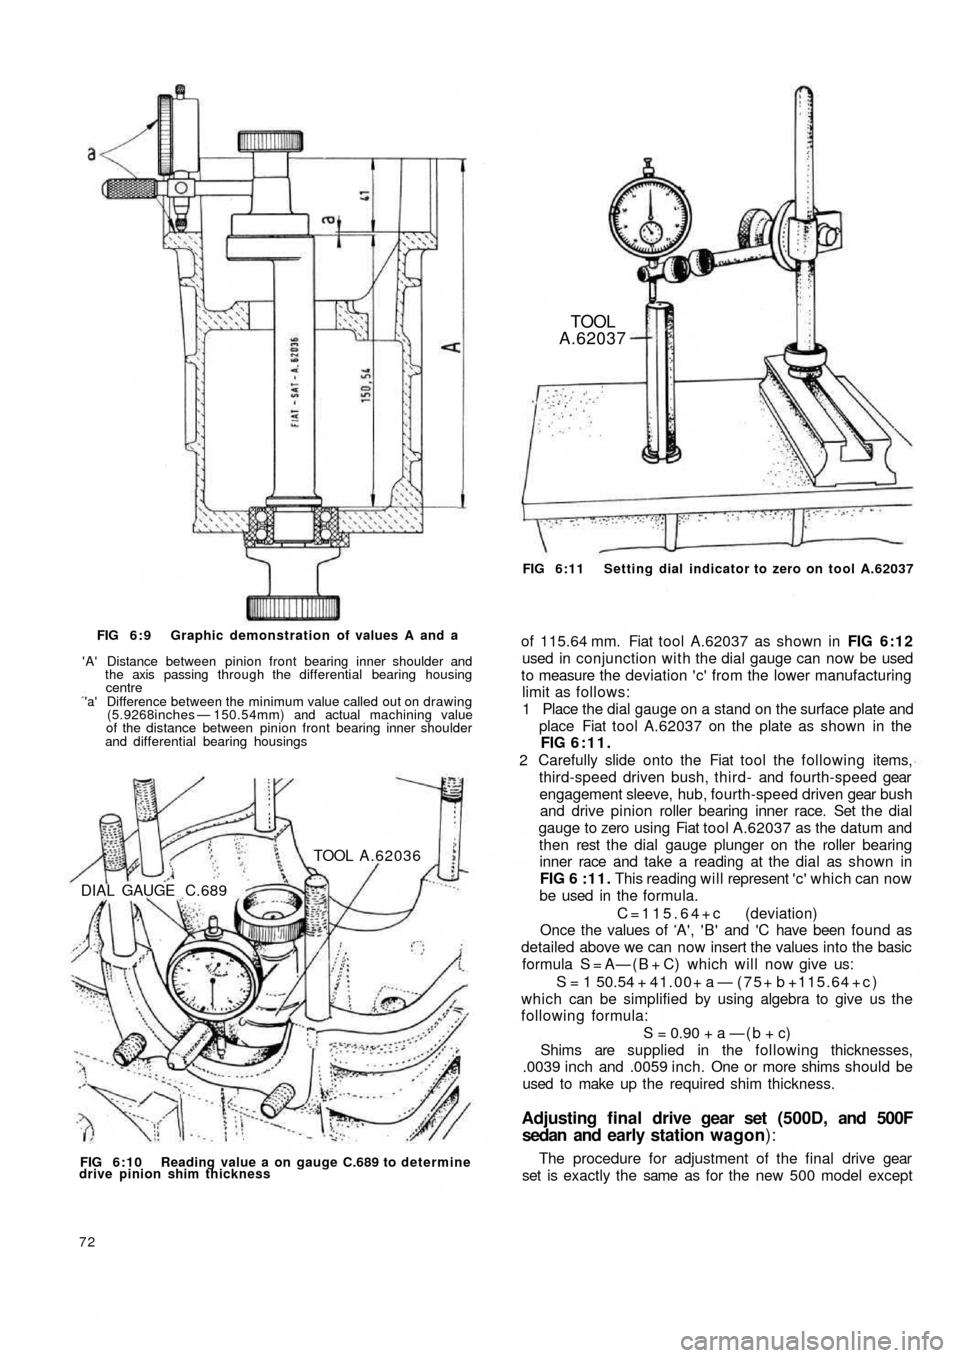 FIAT 500 1970 1.G Repair Manual FIG 6:9  Graphic demonstration of values A and a
A Distance between pinion front bearing inner shoulder and
the axis passing through the differential bearing housing
centrea Difference between the